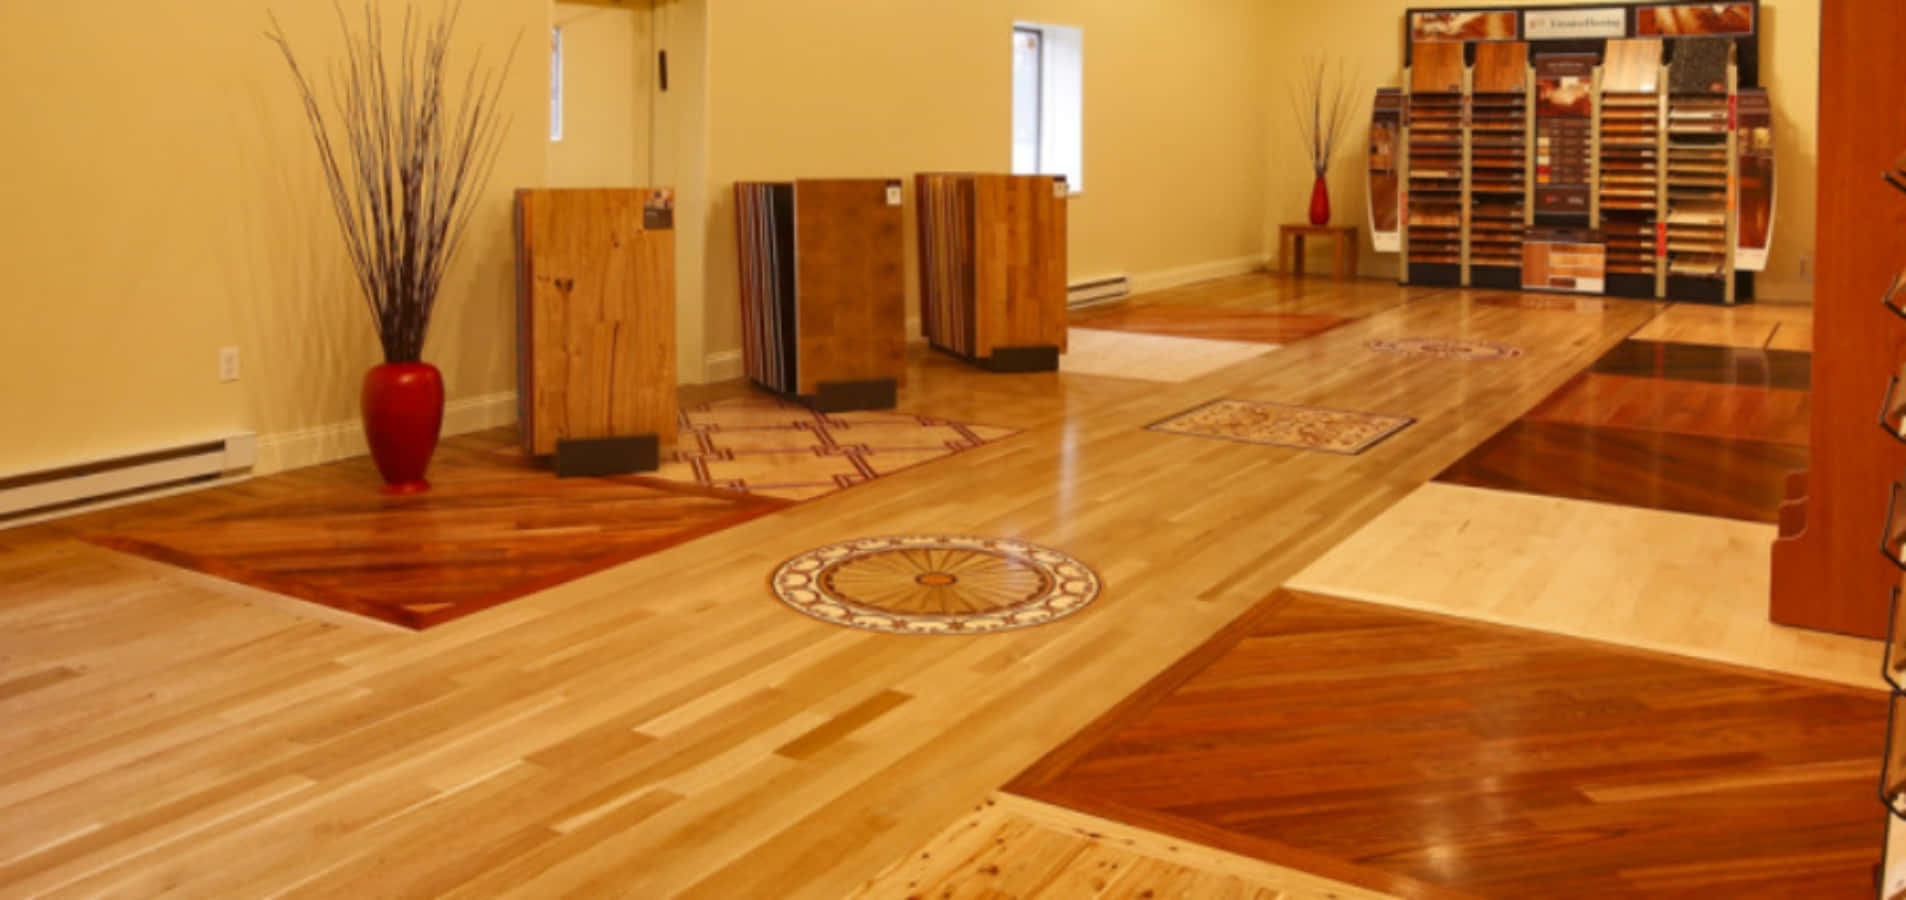 Hardwood Flooring In A Room With Many Different Colors